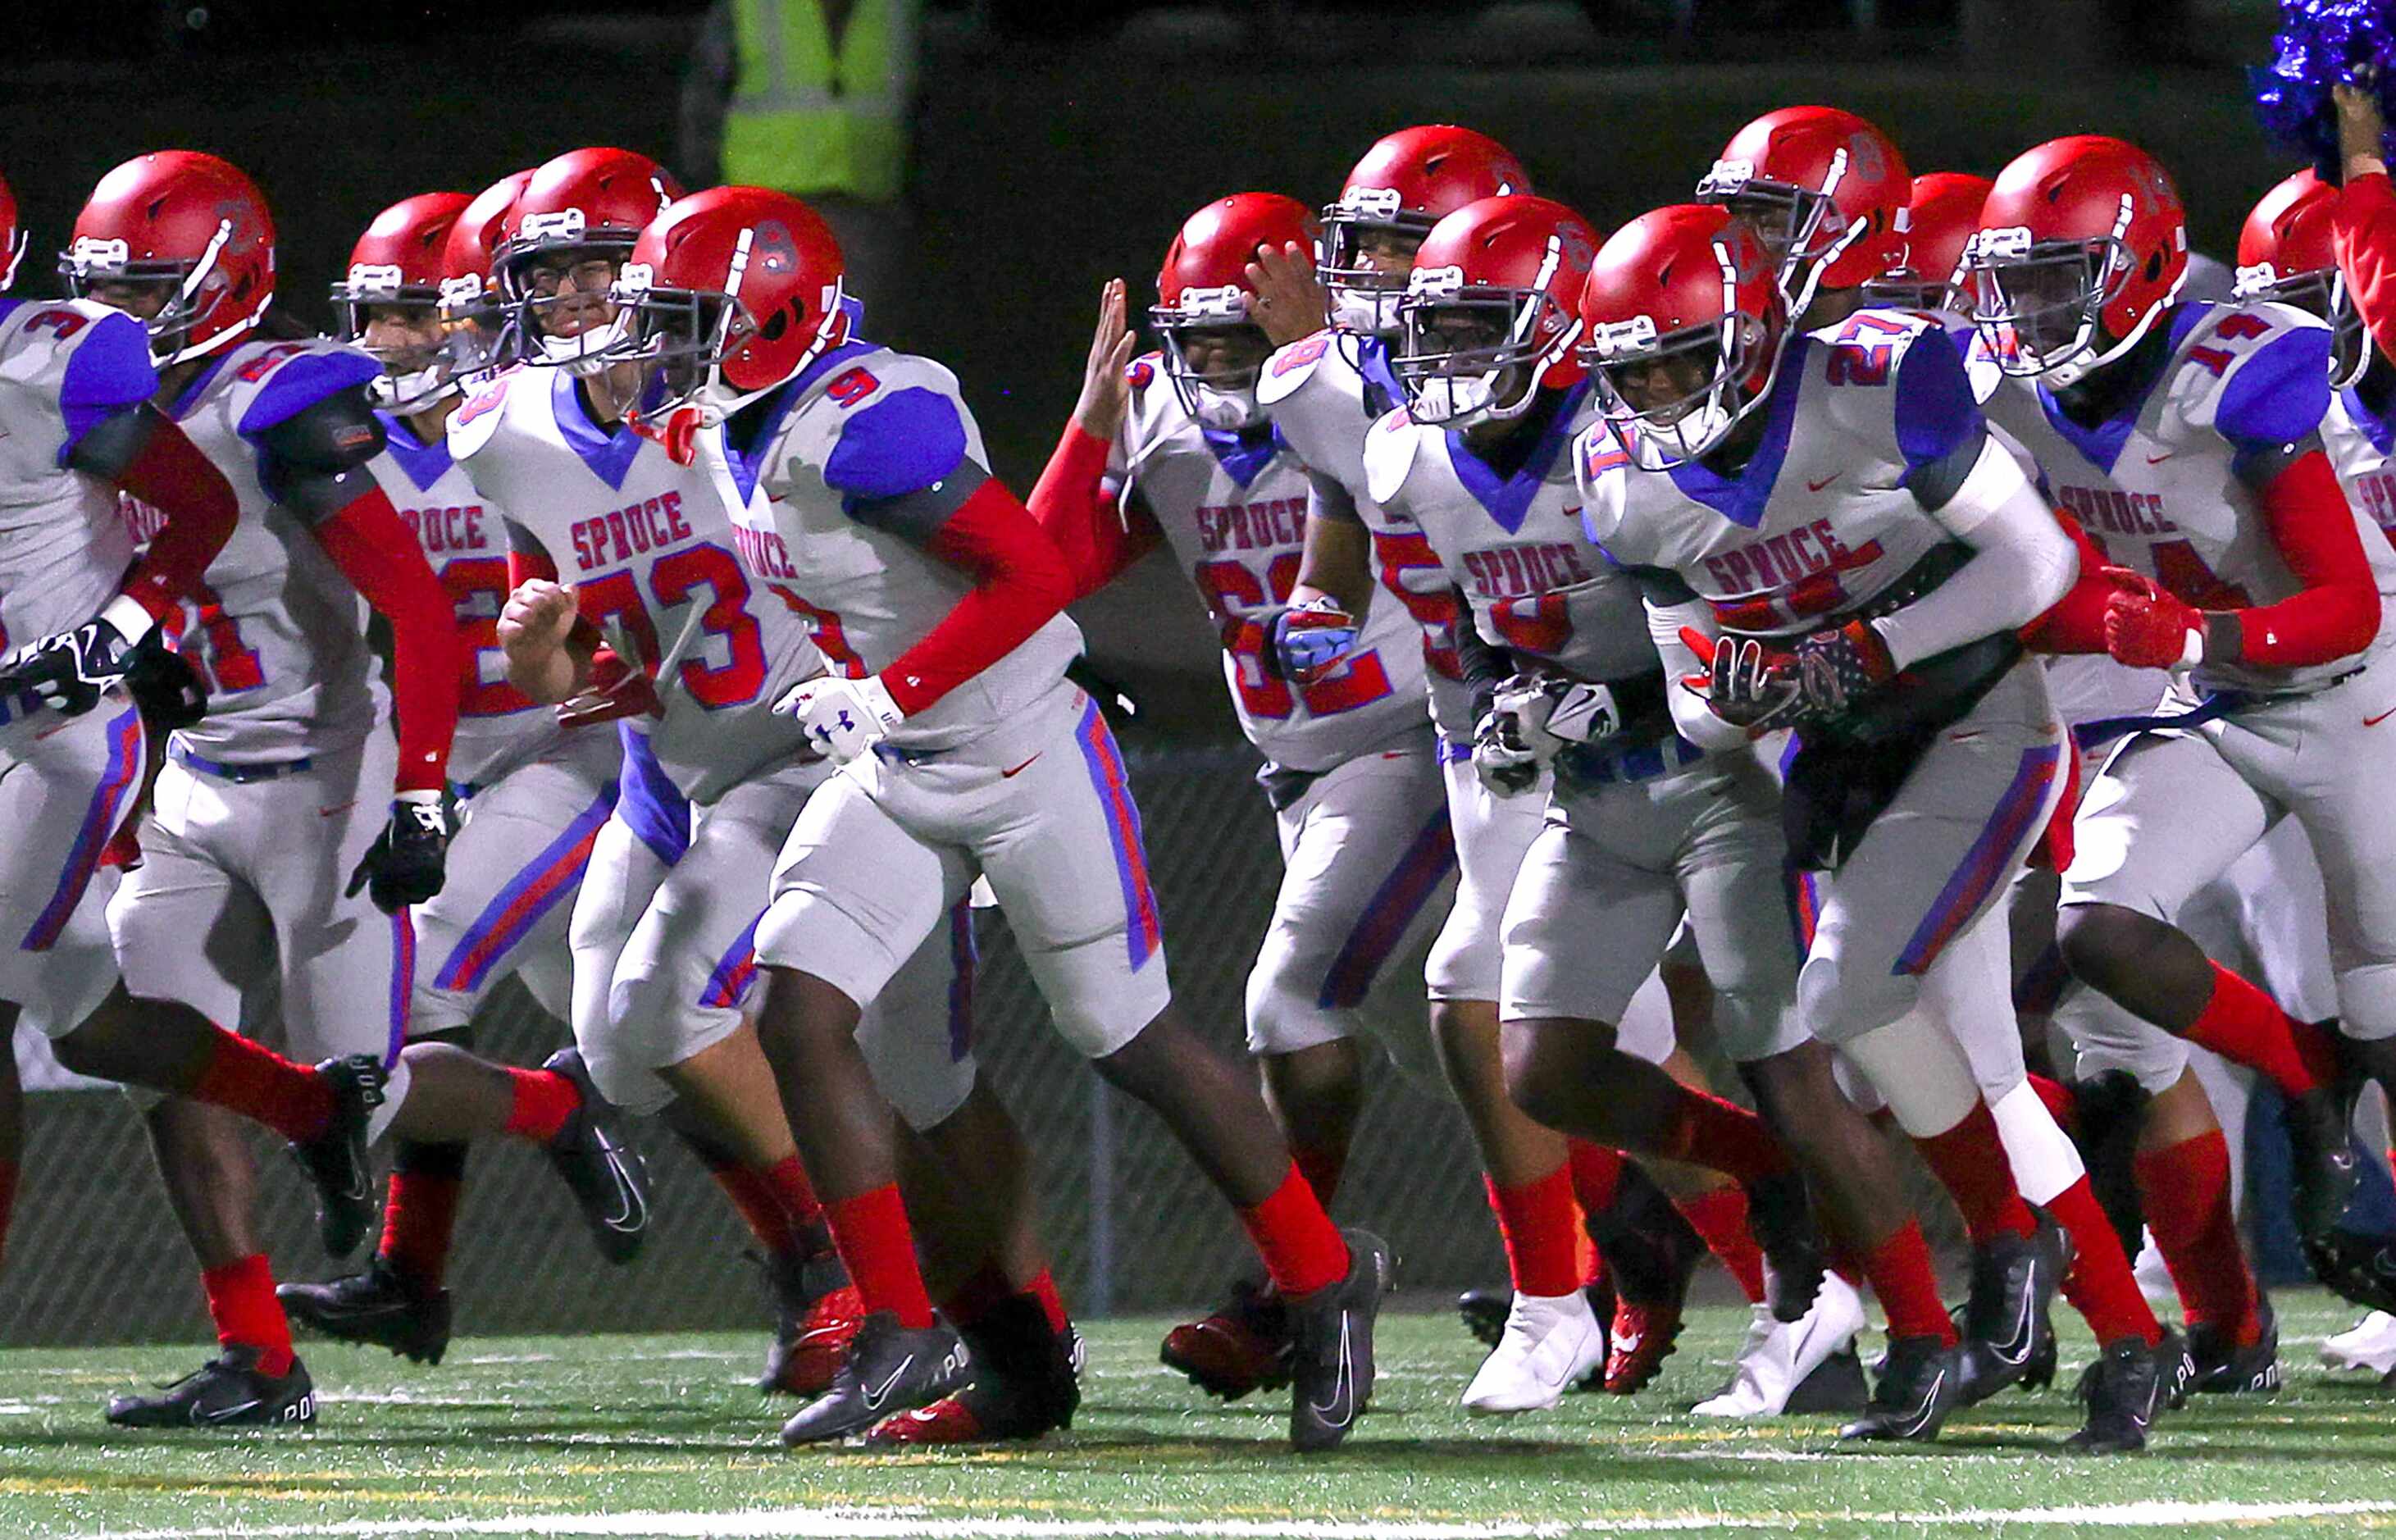 The Spruce Timberwolves enter the field to face Hillcrest in a District 6-5A high school...